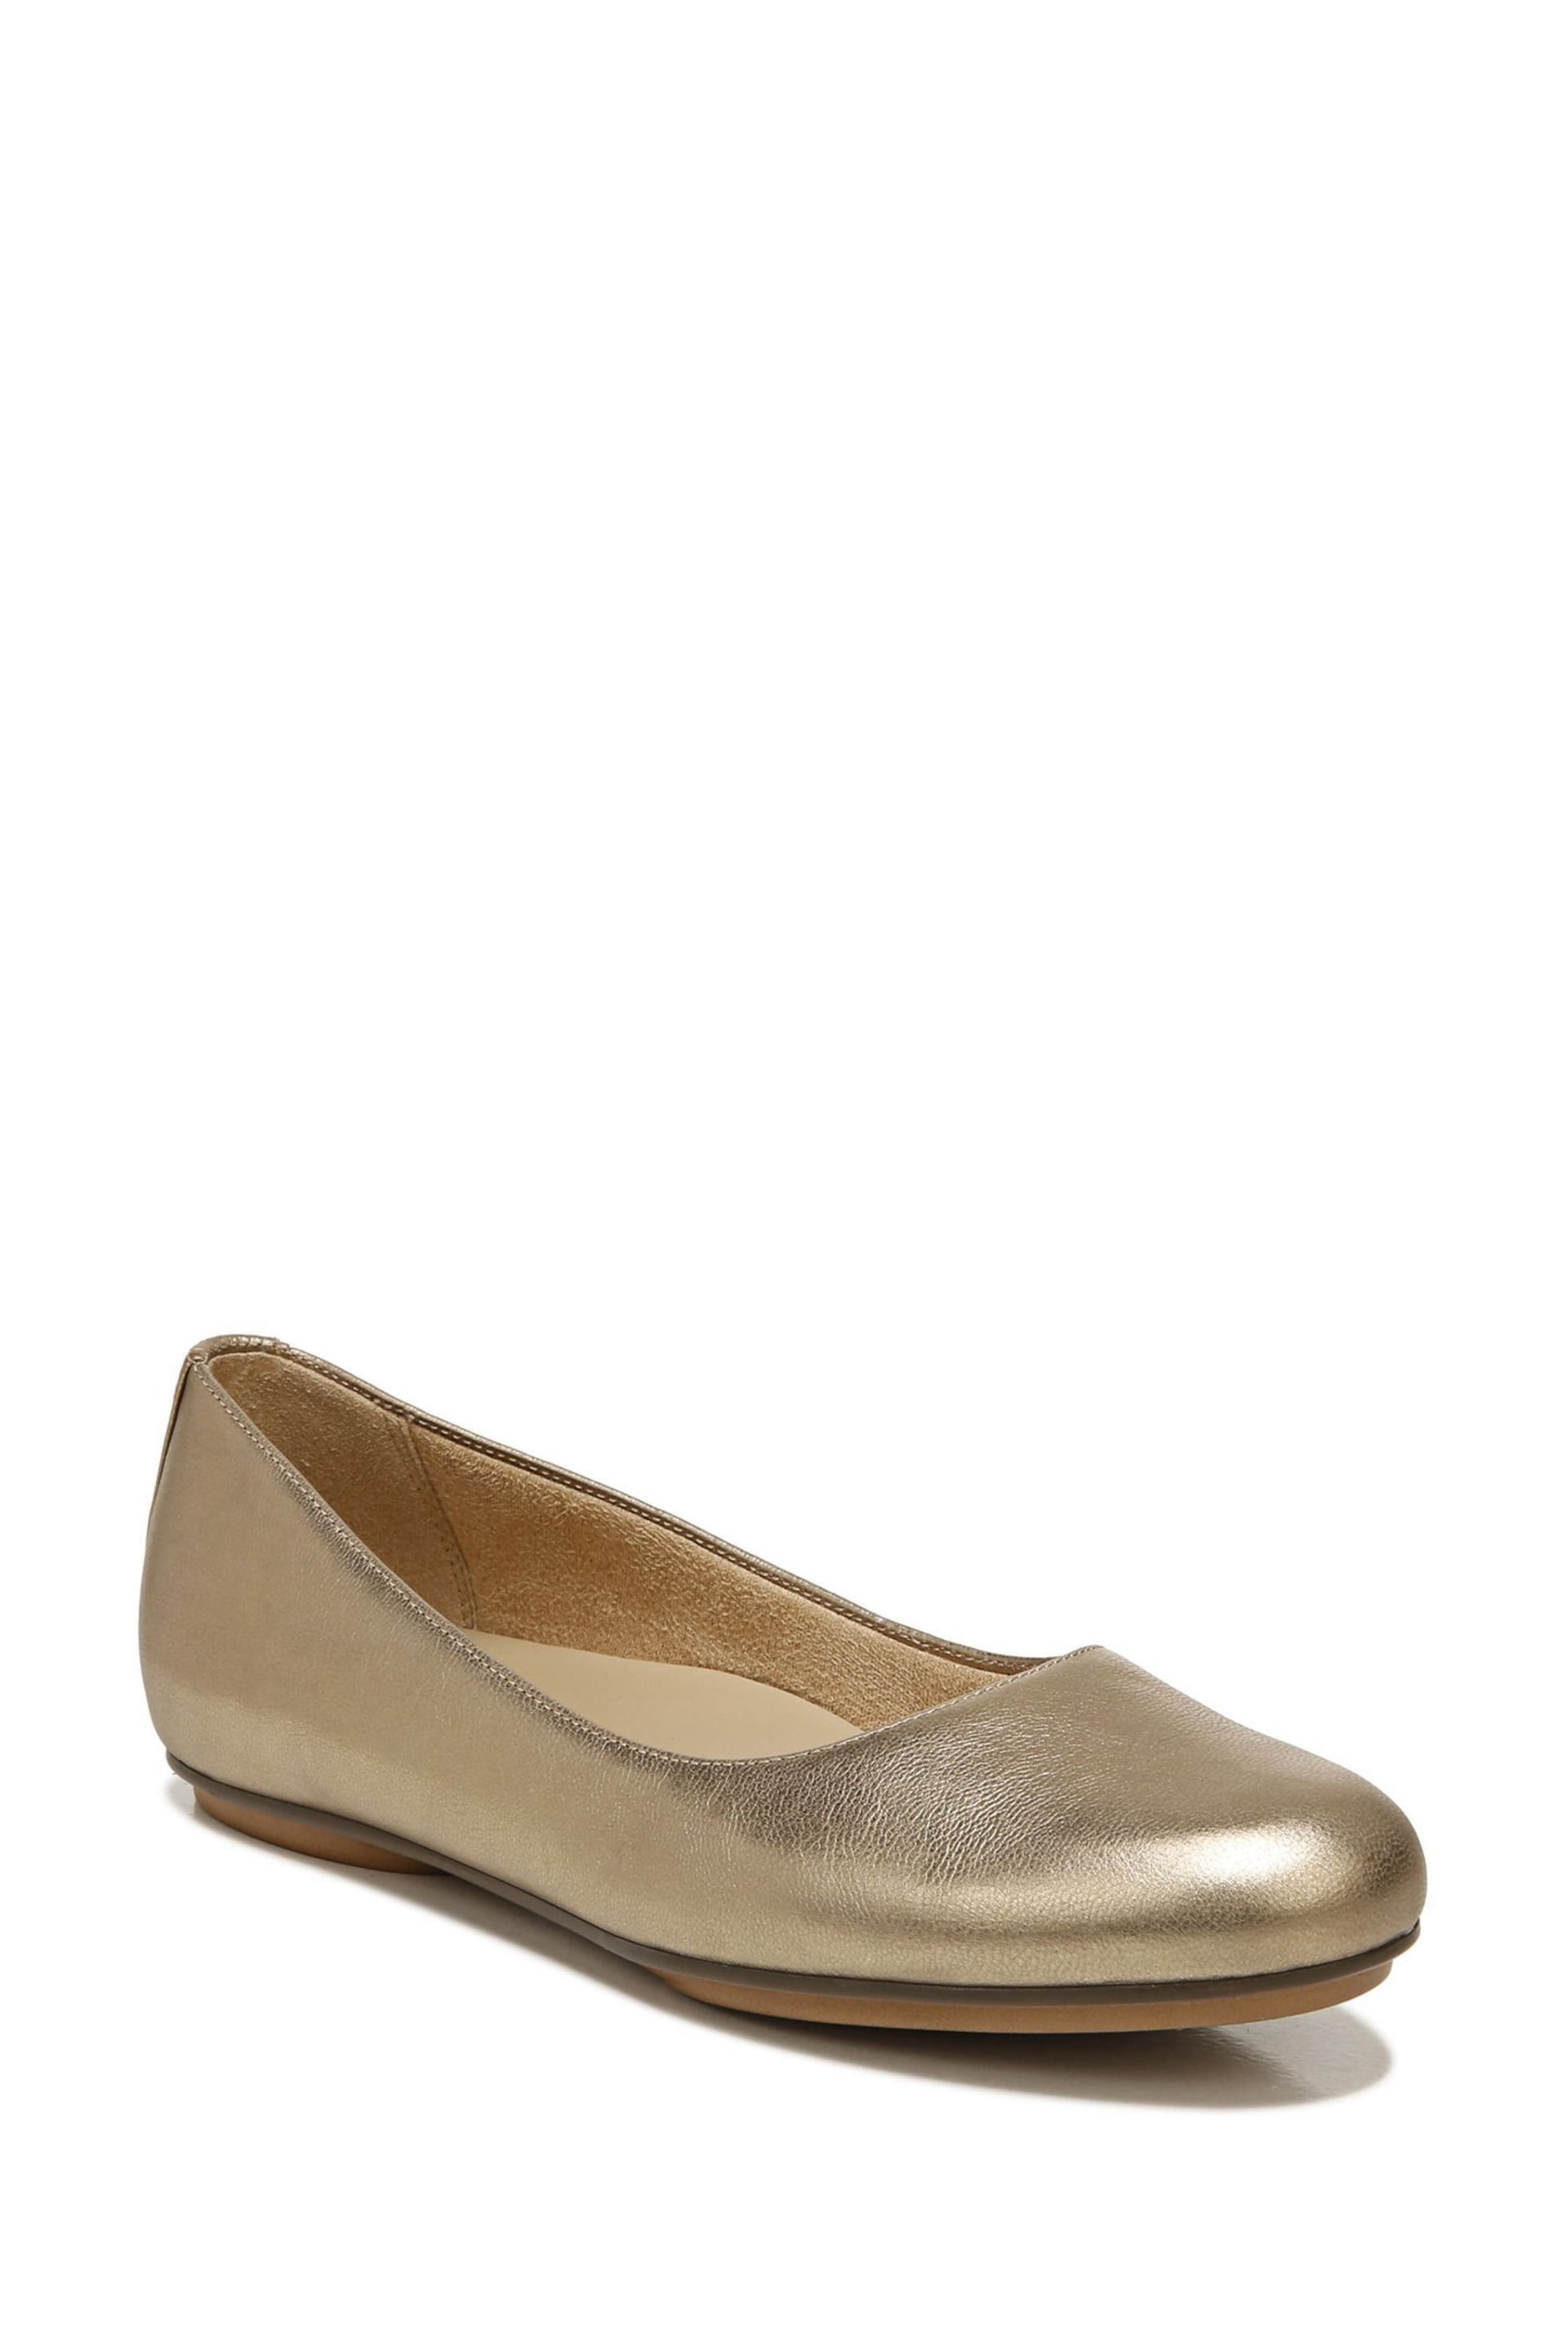 Naturalizer Maxwell Leather Ballerina Shoes - Image 3 of 7